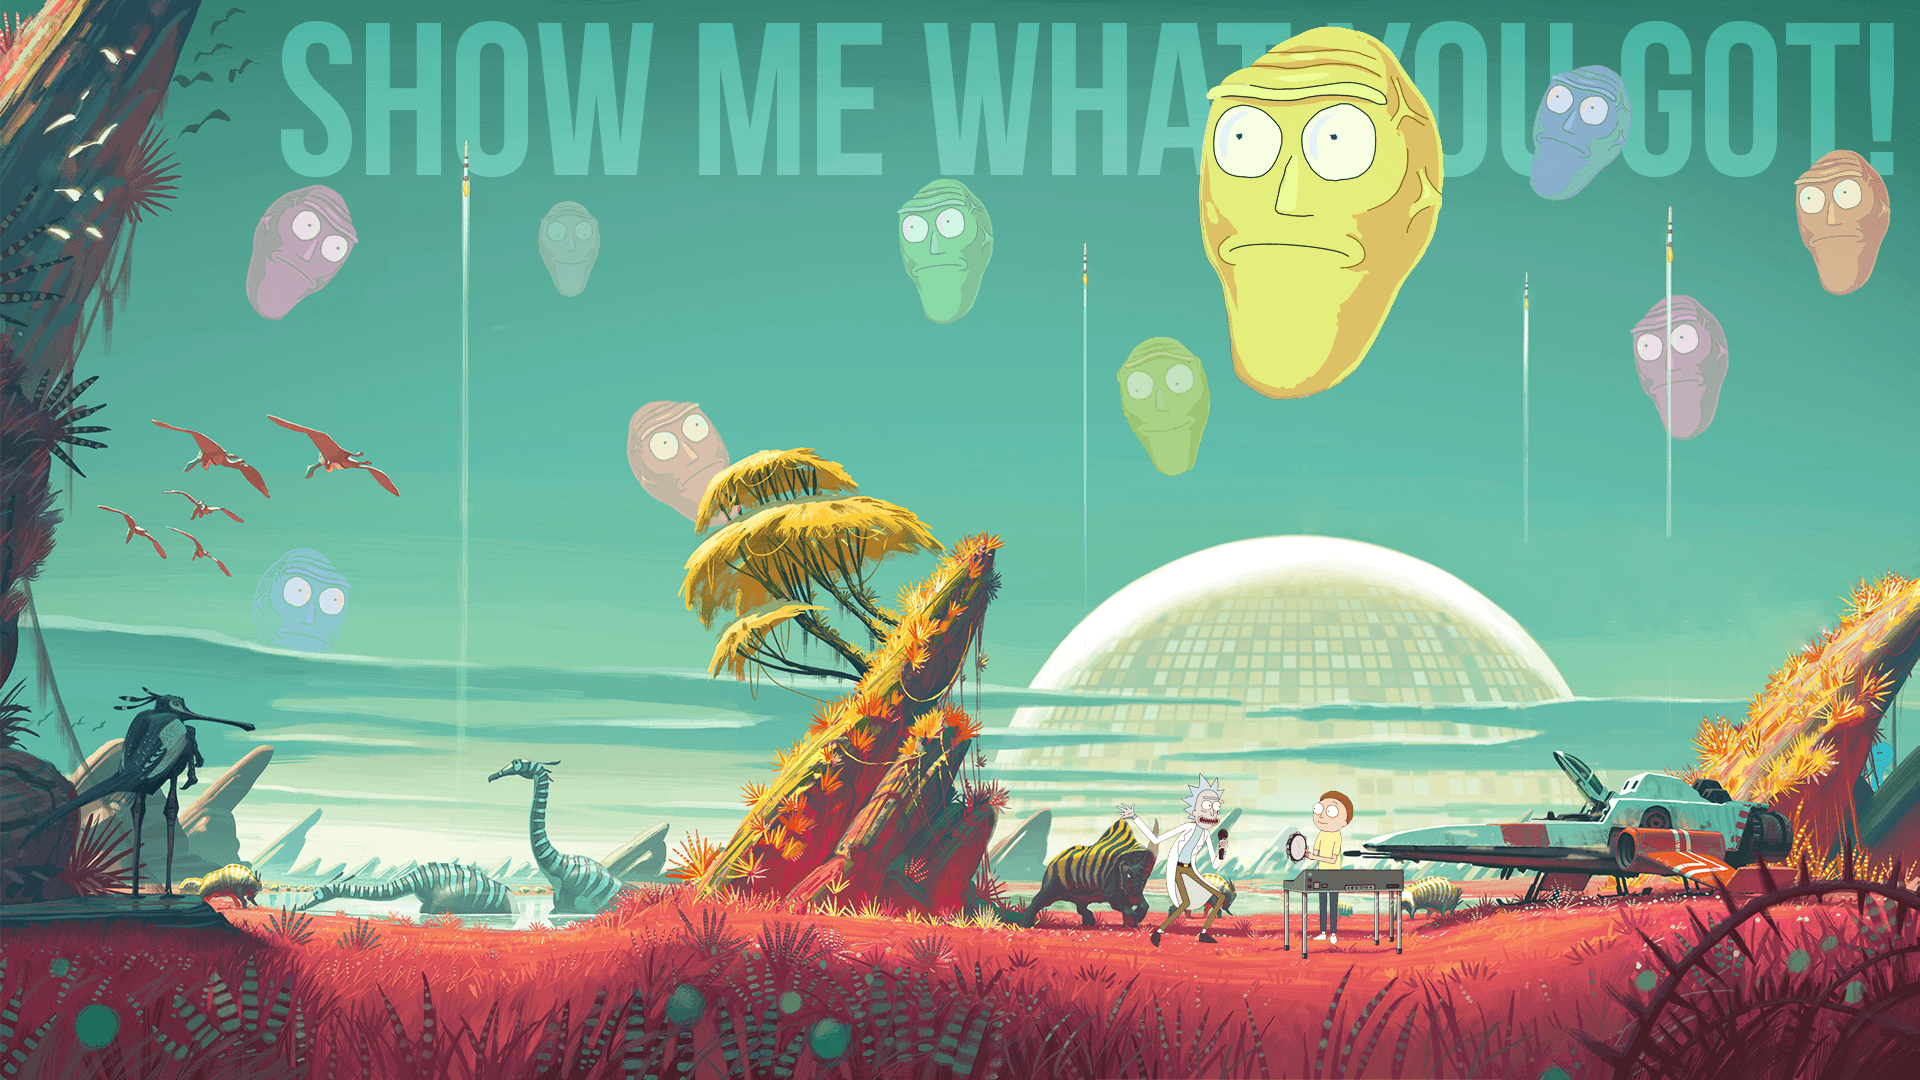 Show me what you got! HD Wallpaper | Background Image ...